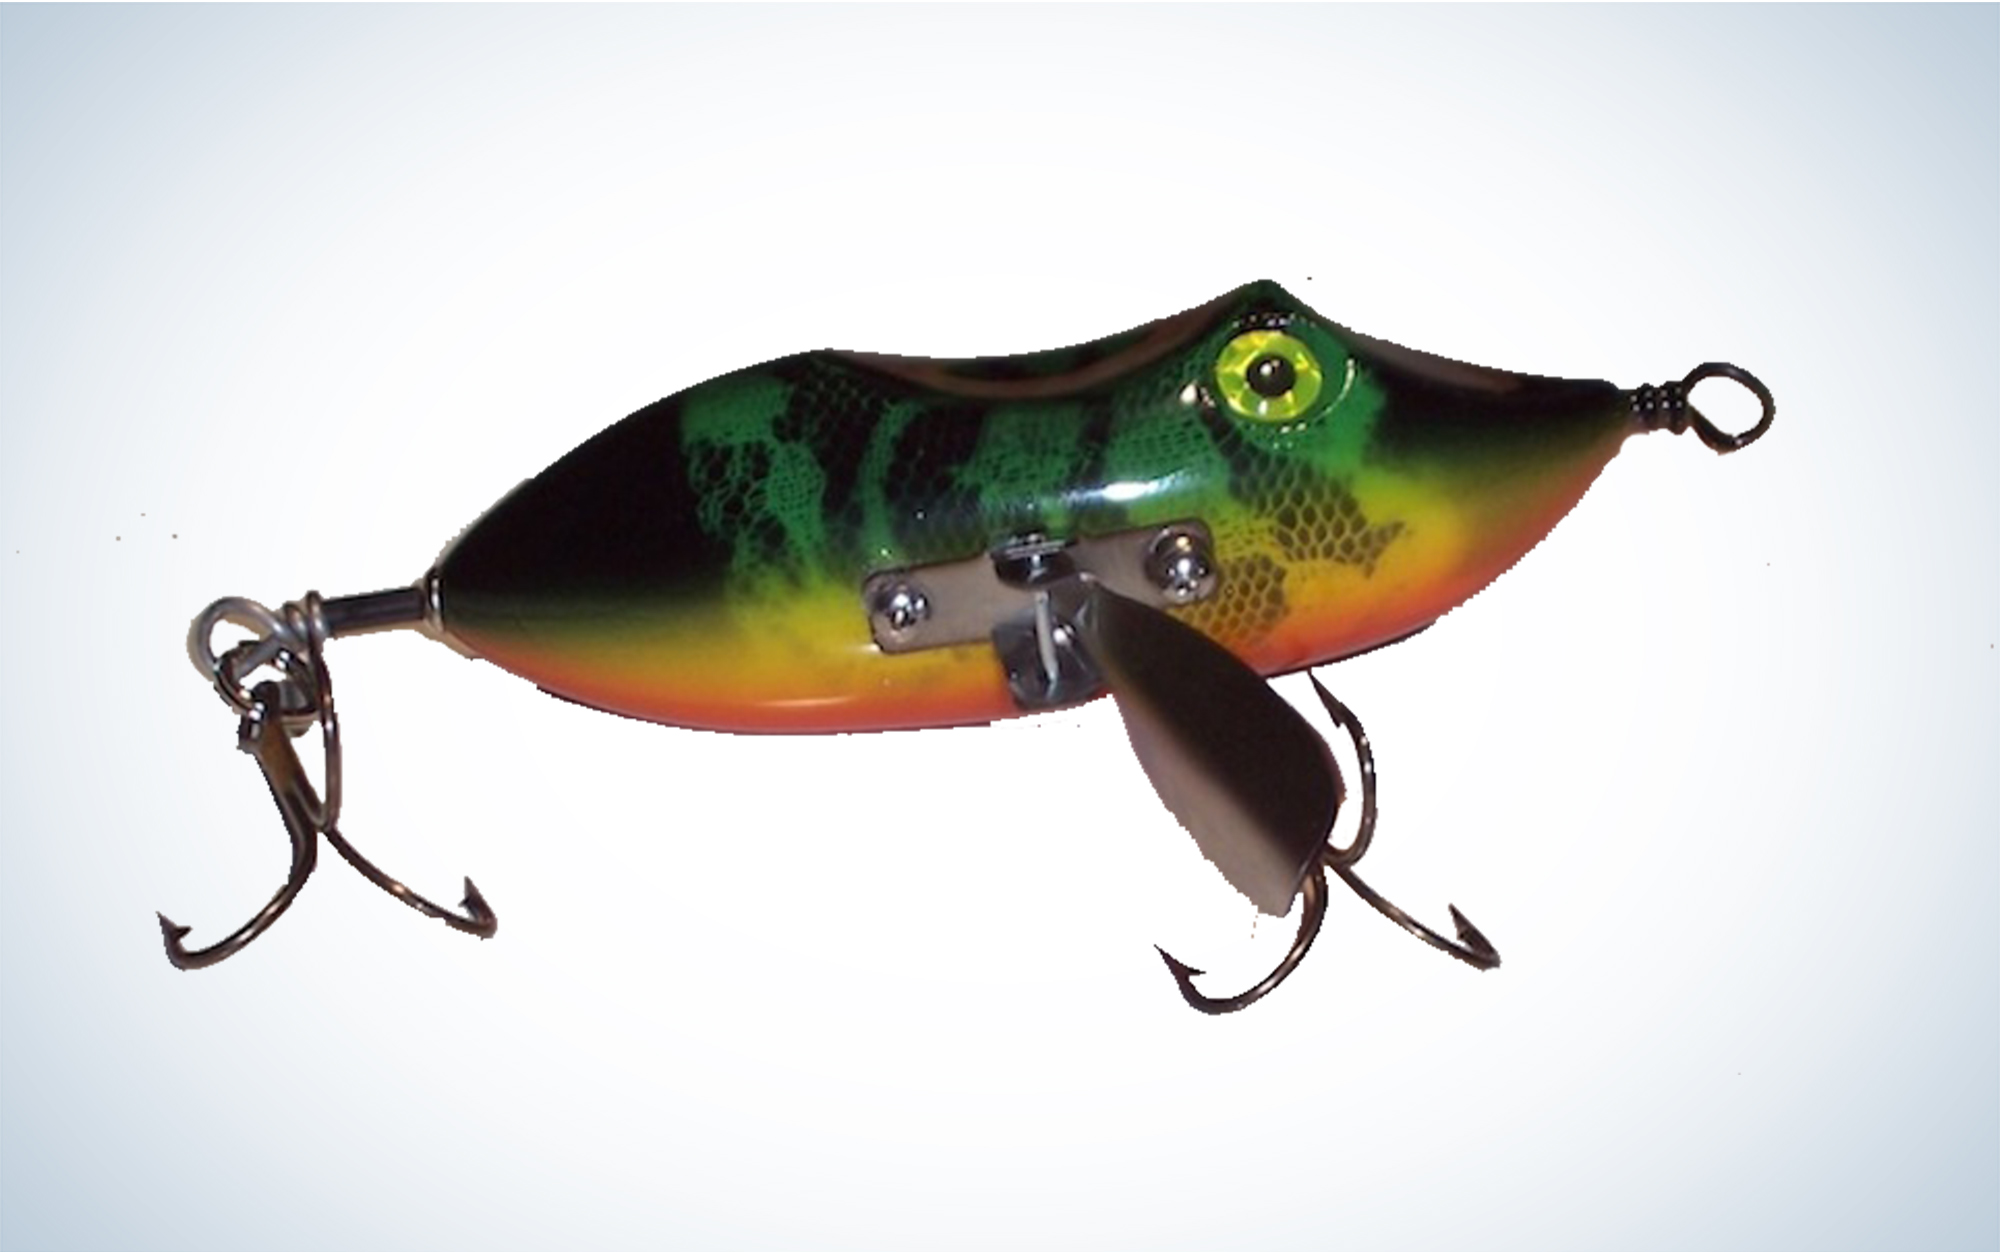 The Bitten Tackle Creeper is one of the best musky lures.